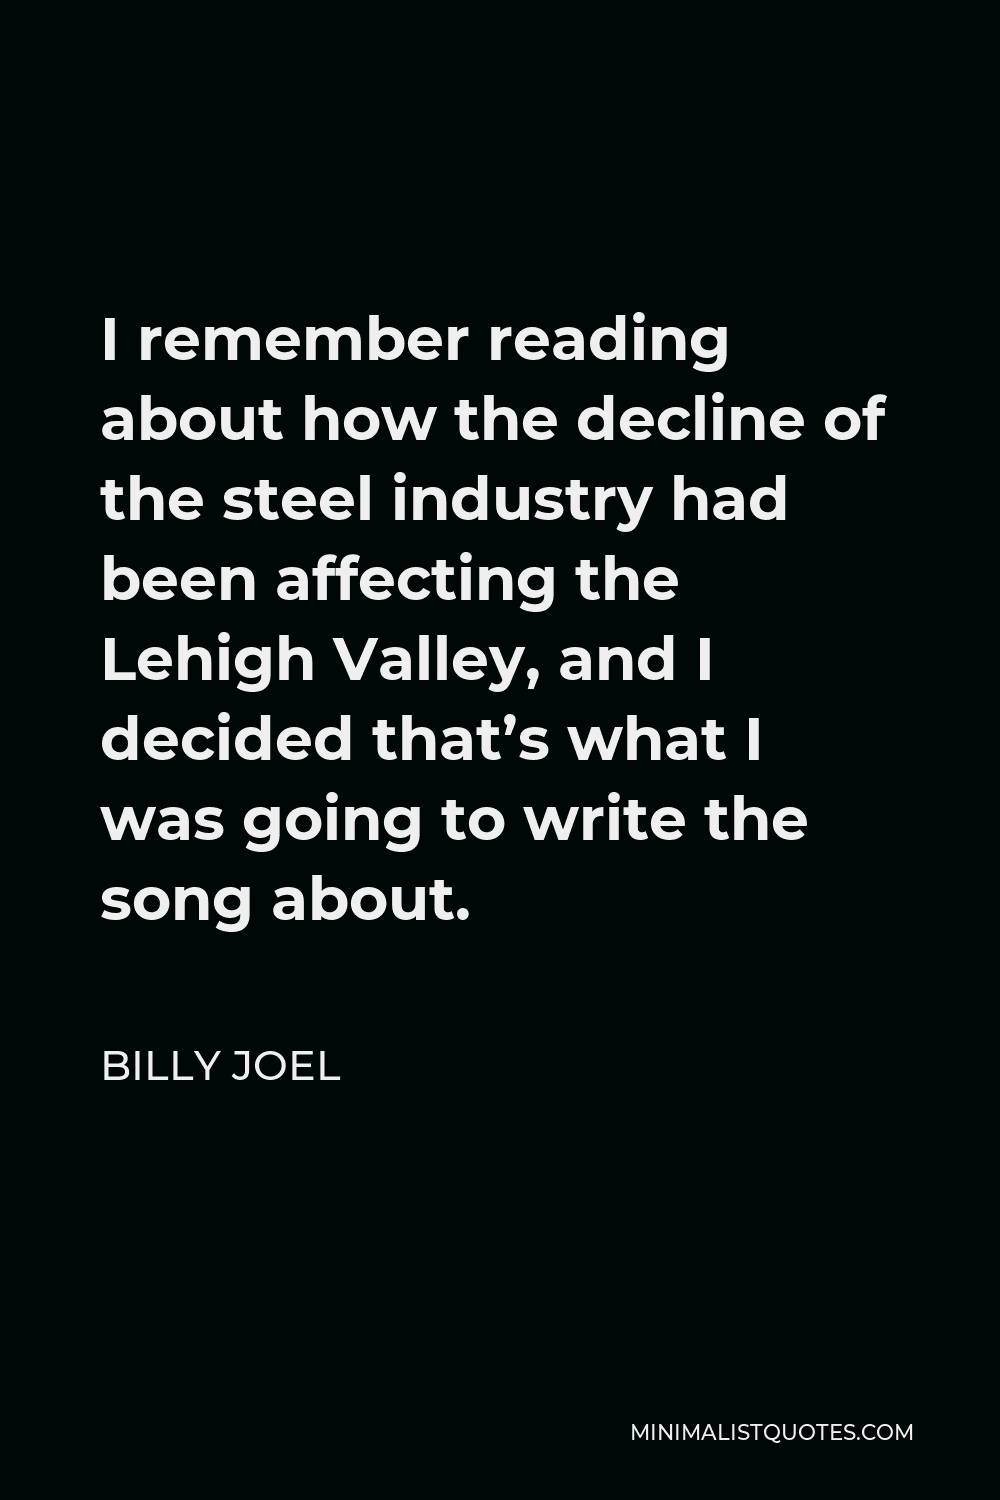 Billy Joel Quote - I remember reading about how the decline of the steel industry had been affecting the Lehigh Valley, and I decided that’s what I was going to write the song about.